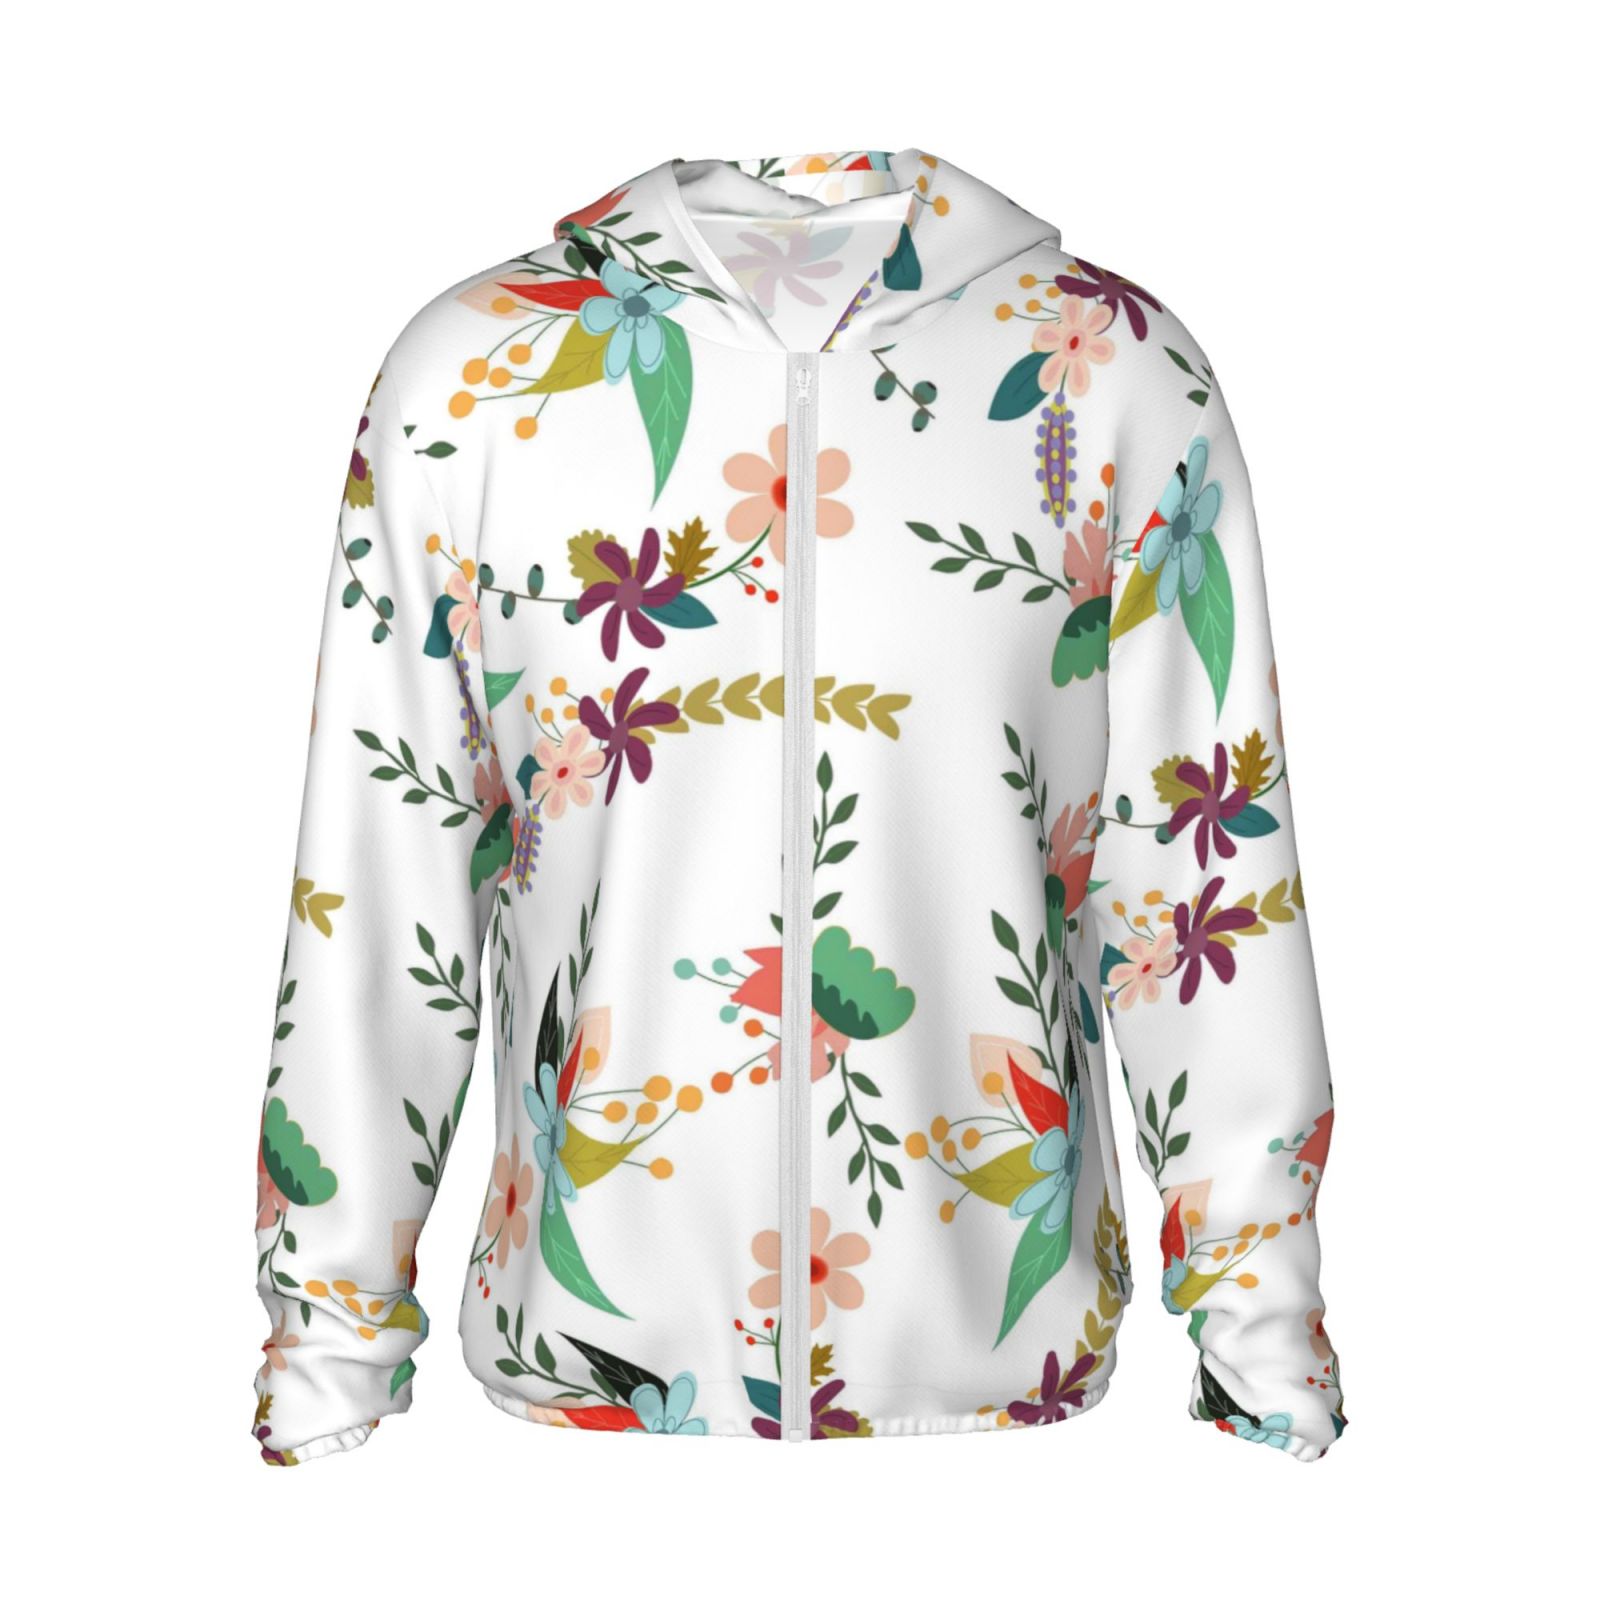 Haiem Pretty Floral With Leaves UPF 50+ Fishing Shirts for Men Long ...